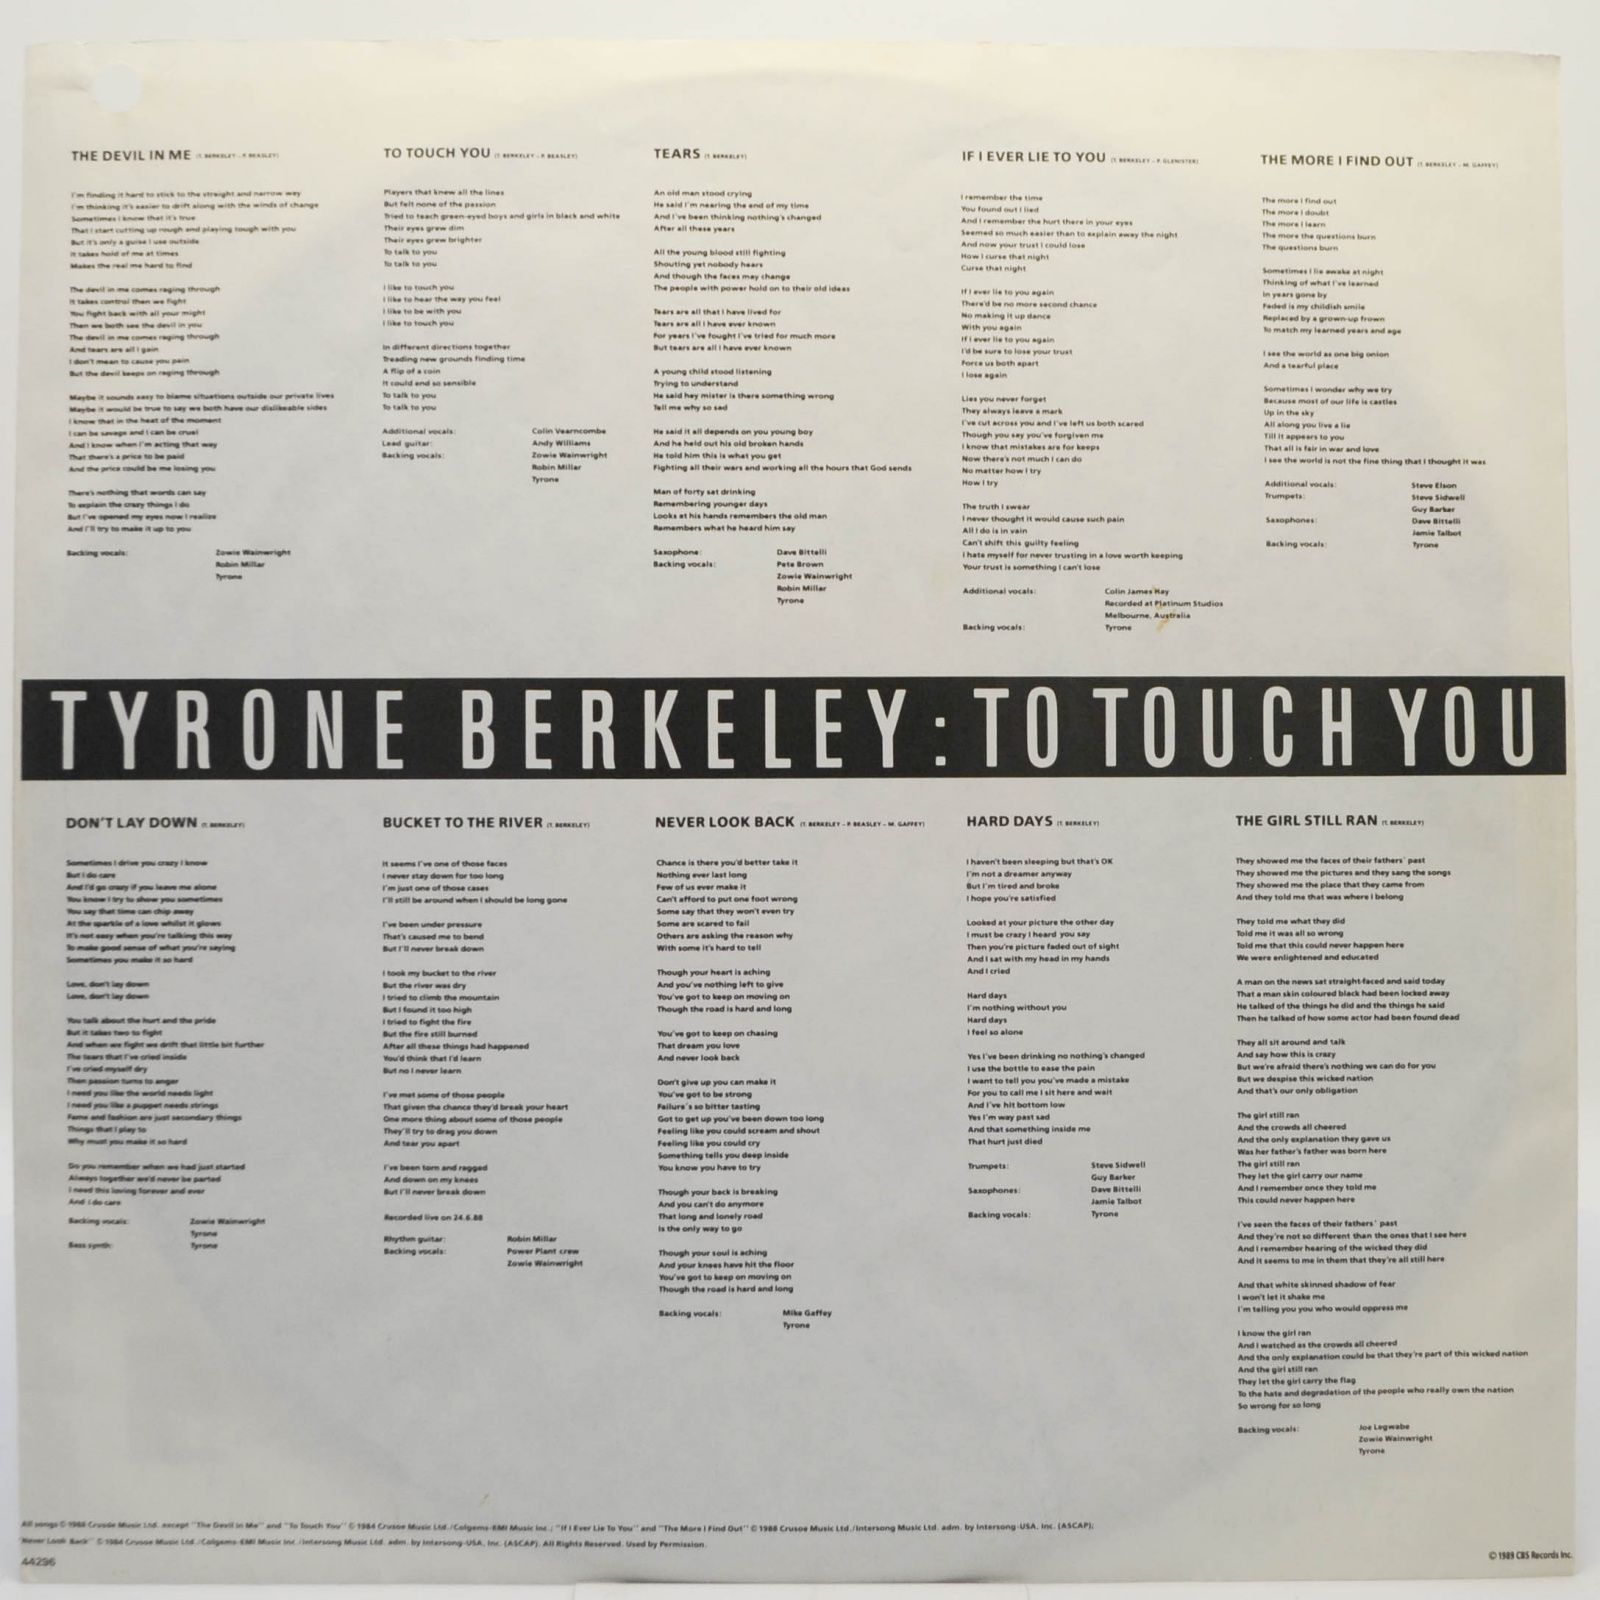 Tyrone Berkeley — To Touch You, 1989